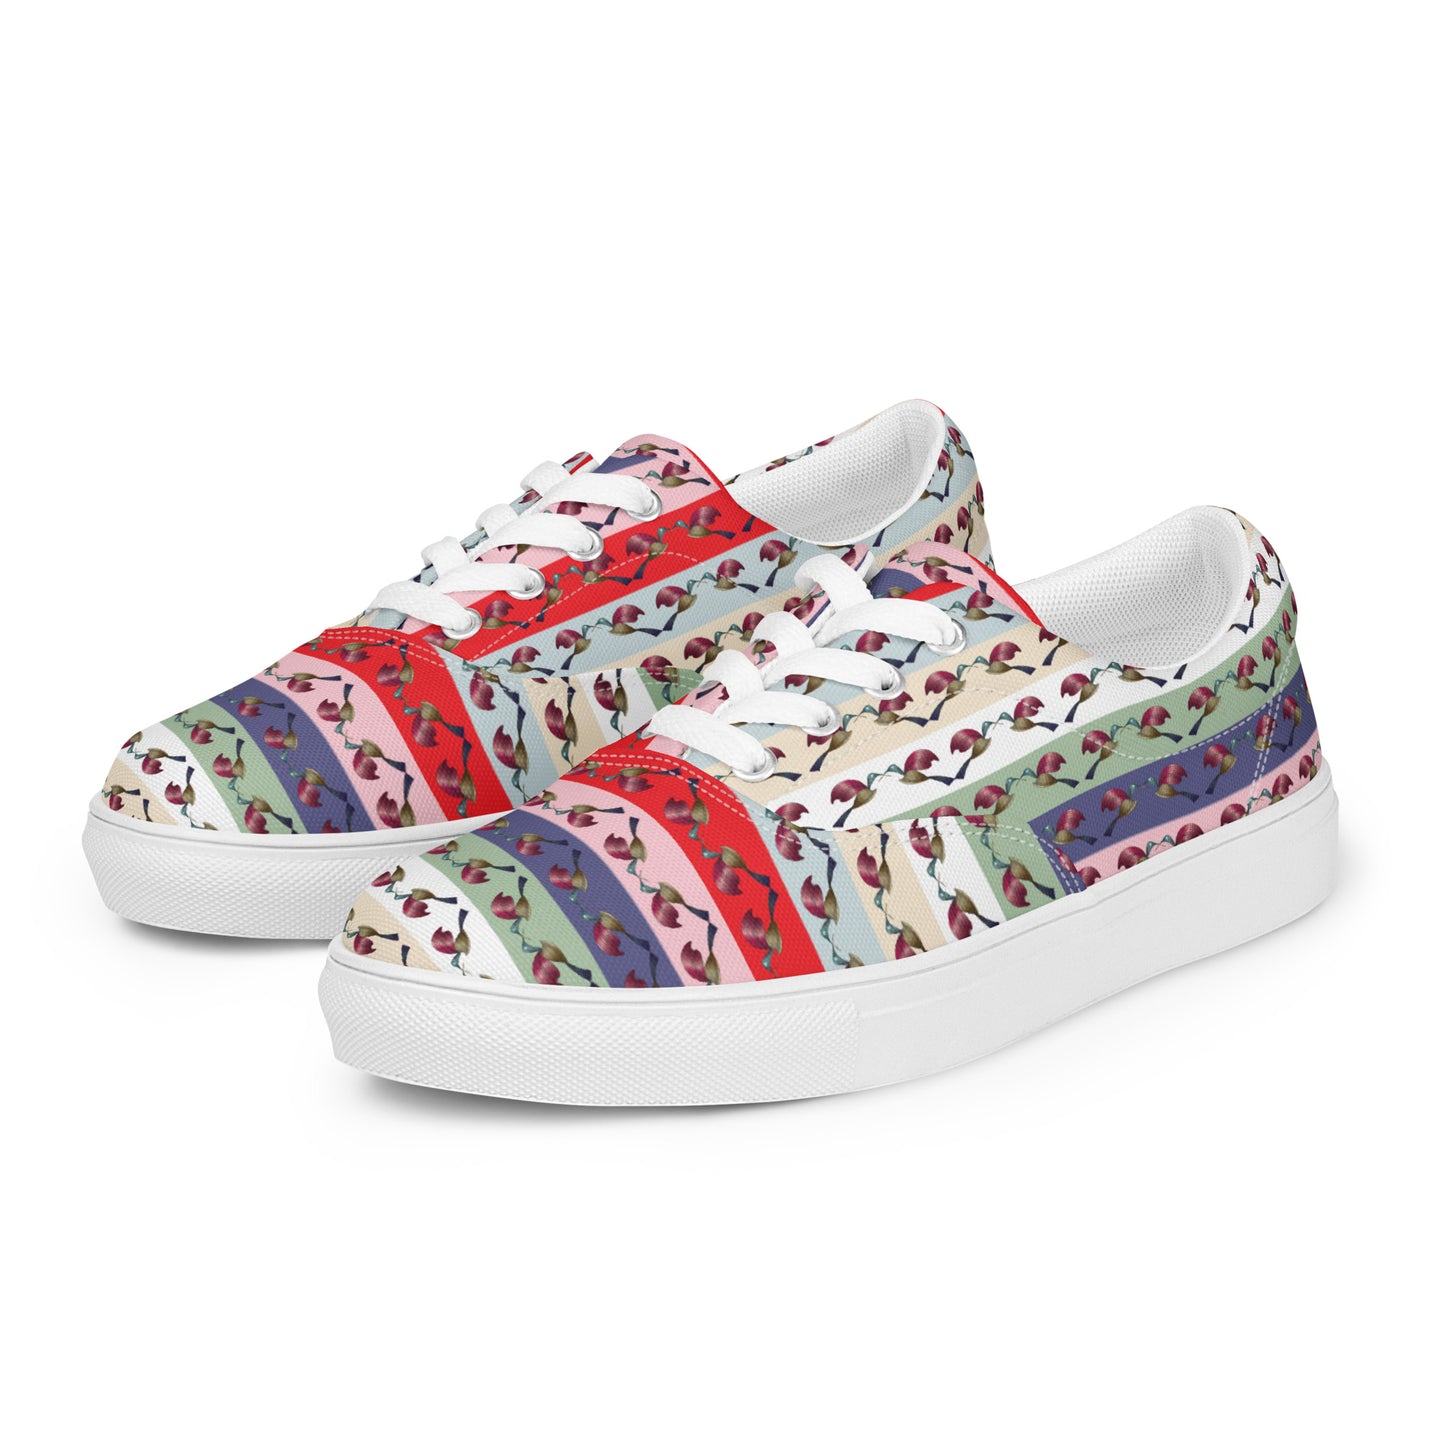 Women’s lace-up canvas shoes Kukloso FS Multicolor Hummingbirds - Free Shipping